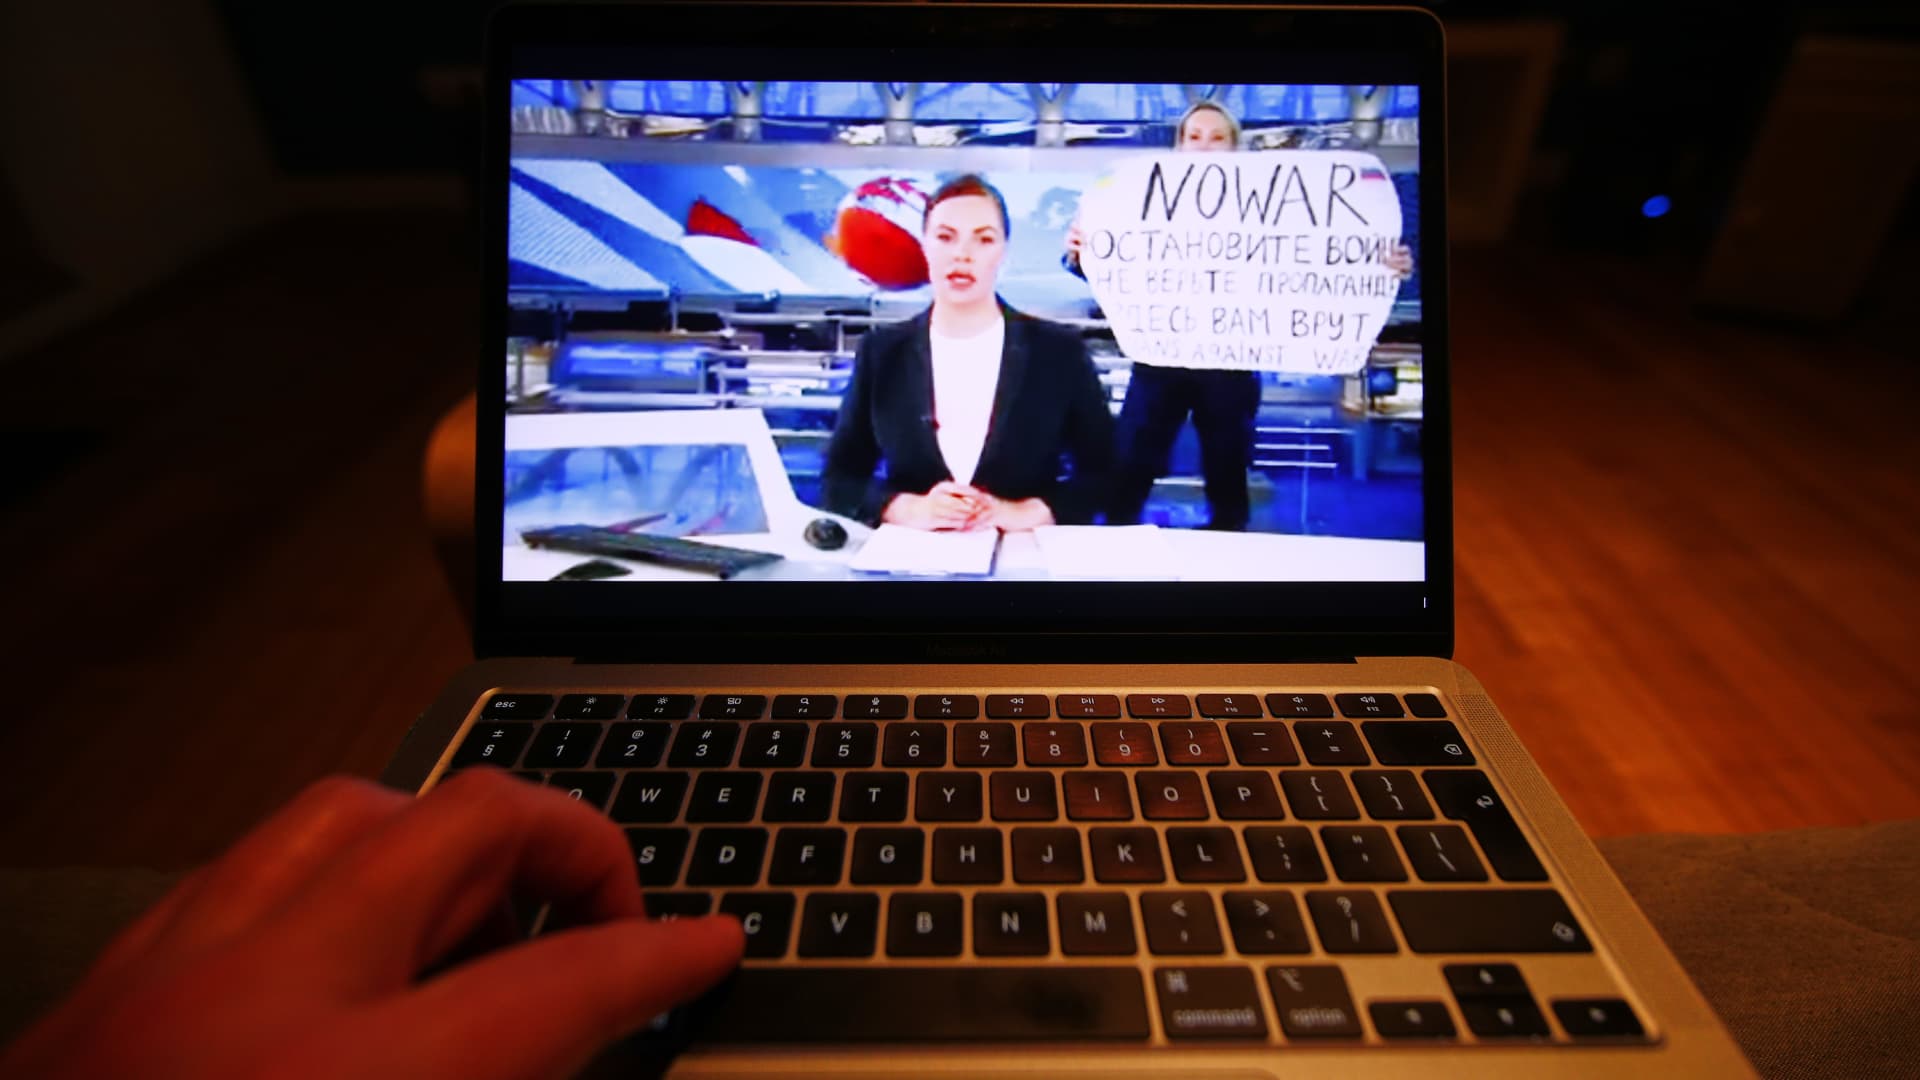 The evening news broadcast on the main Russian news channel, Channel 1 is seen on a laptop as it is interrupted by a woman protesting the war in Ukraine in this illustration photo on 15 March, 2022 in Warsaw, Poland. Marina Ovsyannikova, an employee of the network ran onto the stage with a sign reading 'No War' and 'They're lying to you here'.